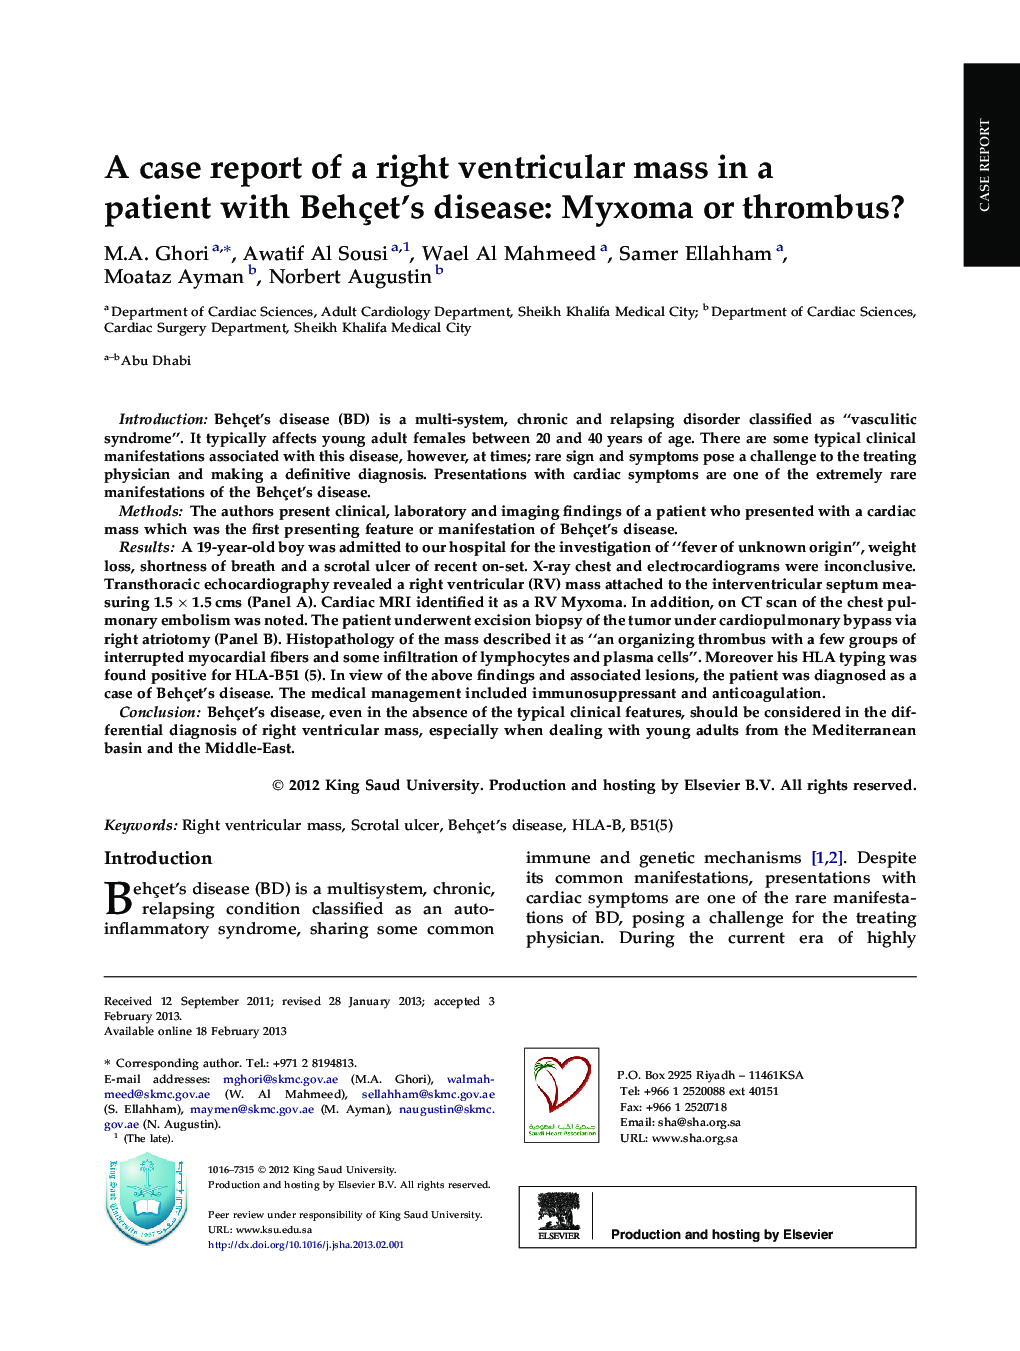 A case report of a right ventricular mass in a patient with Behçet’s disease: Myxoma or thrombus? 